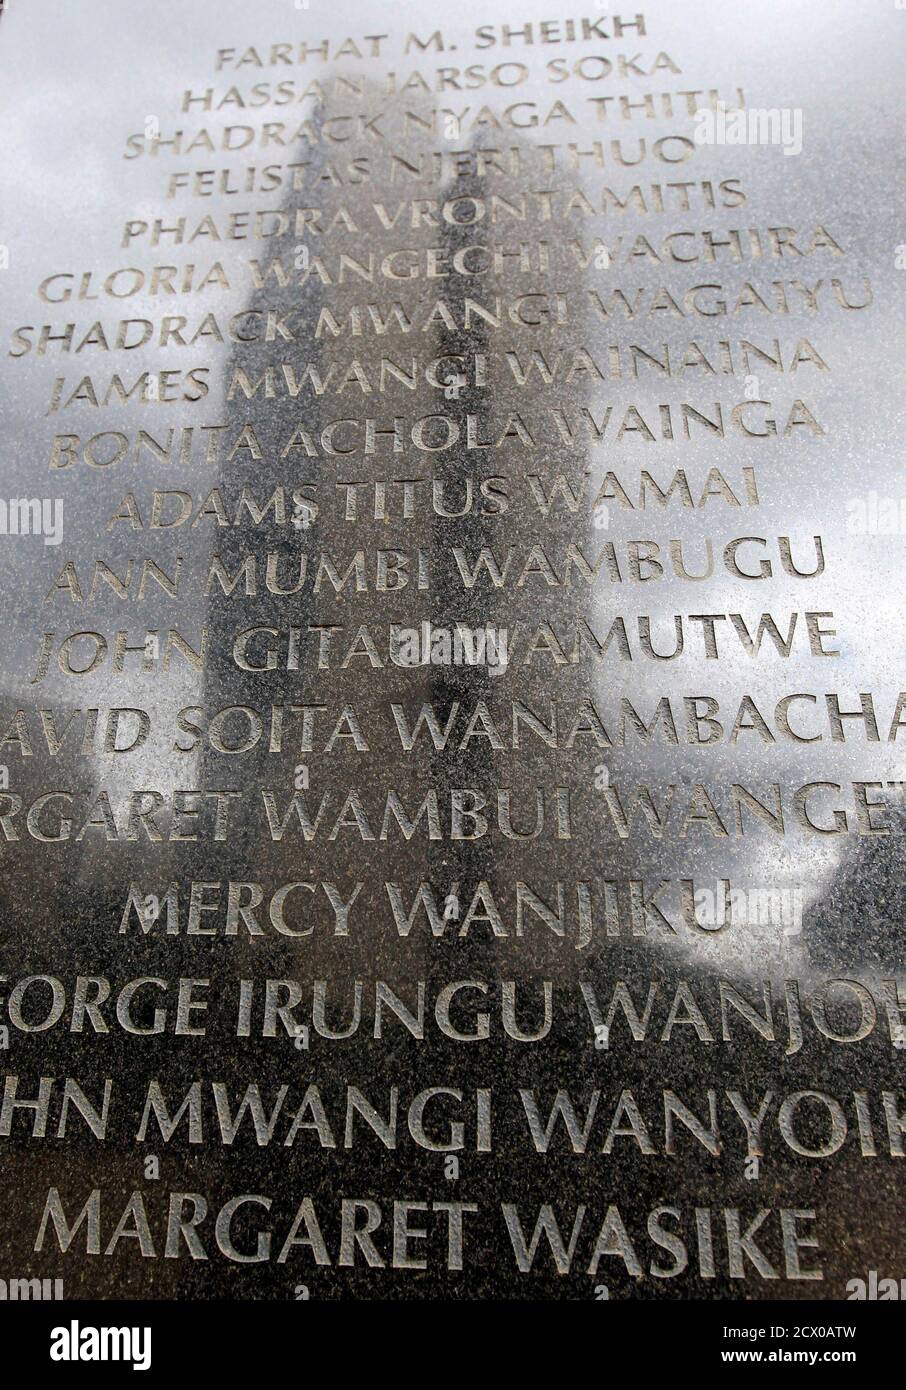 Names of the 248 people killed in the 1998 bombing of the U.S.embassy are seen on the memorial wall in Nairobi May 2, 2011. Al Qaeda leader Osama bin Laden was killed in a U.S. helicopter raid on a mansion near the Pakistani capital Islamabad early on Monday, officials said, ending a nearly 10-year worldwide hunt for the mastermind of the Sept. 11 attacks. The Cooperative Bank building, which was also damaged in the August 7, 1998 truck bomb attacks aimed at U.S. embassies in Kenya, is reflected on the memorial wall.  REUTERS/Thomas Mukoya (KENYA - Tags: CONFLICT CIVIL UNREST POLITICS) Stock Photo